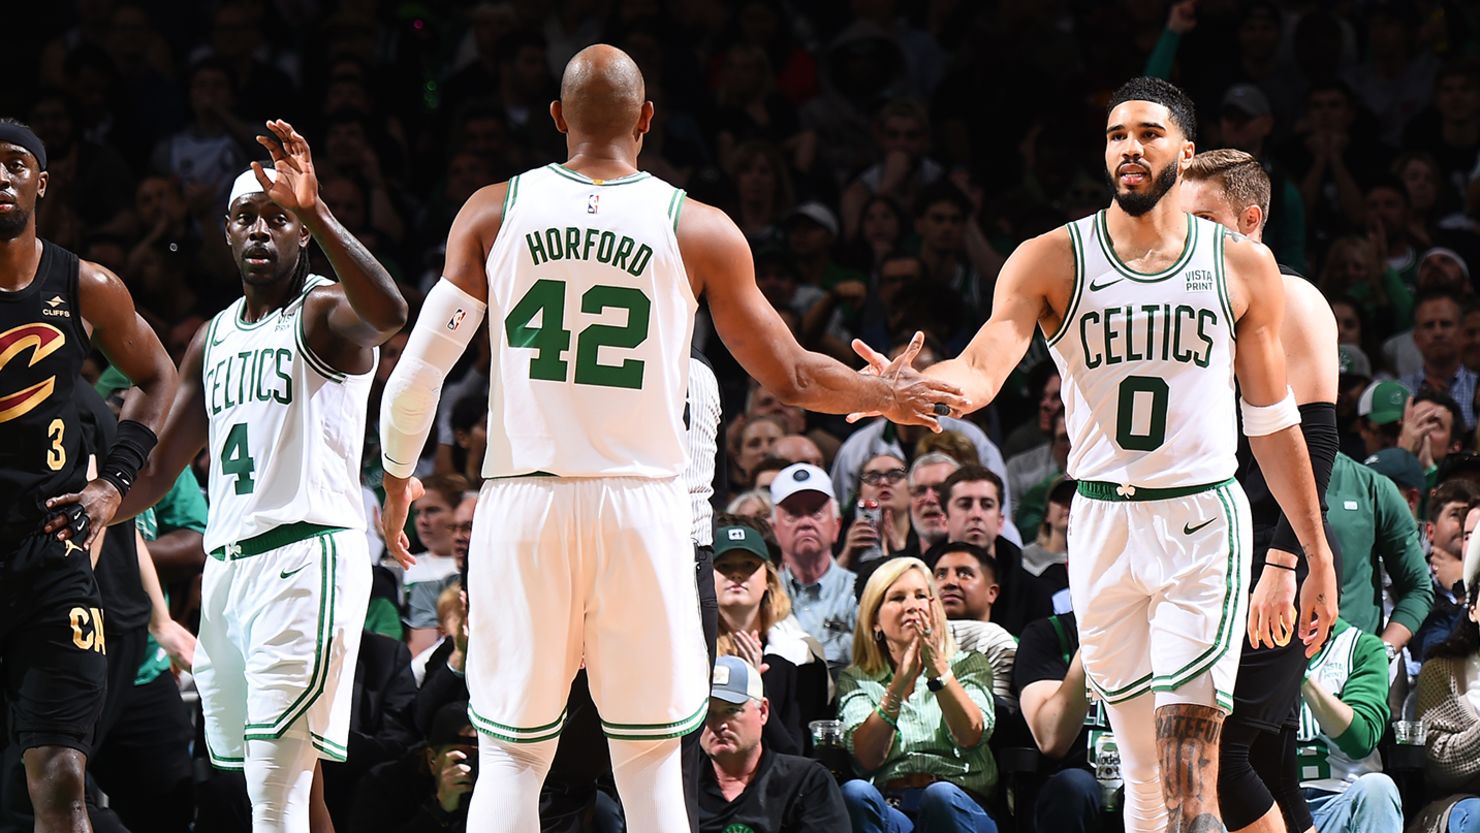 Celtics vs Pacers What to Expect as They Kick Off Eastern Conference Finals Showdown---